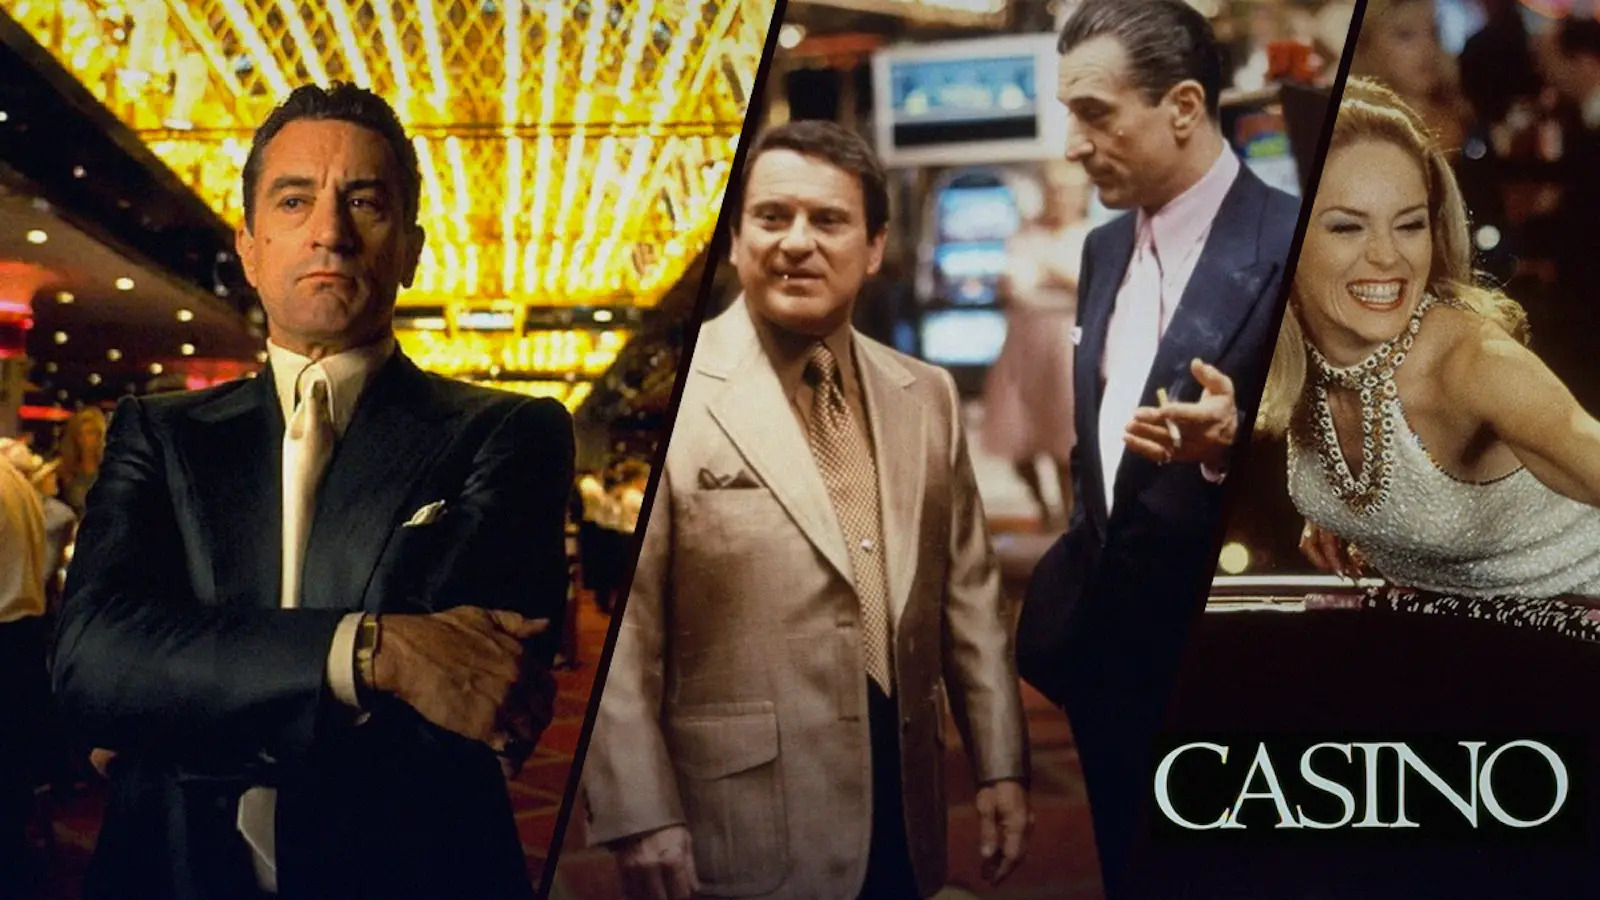 32 Facts about the movie Casino - Facts.net